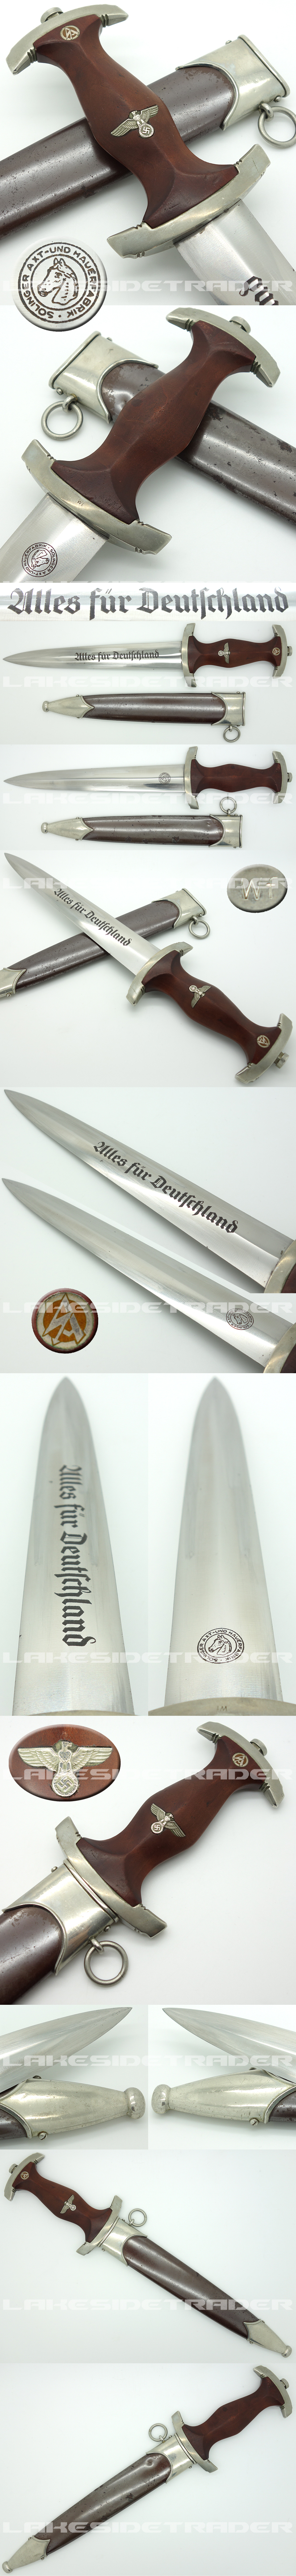 Early SA Dagger by Solinger Axt und Hauerfabrik